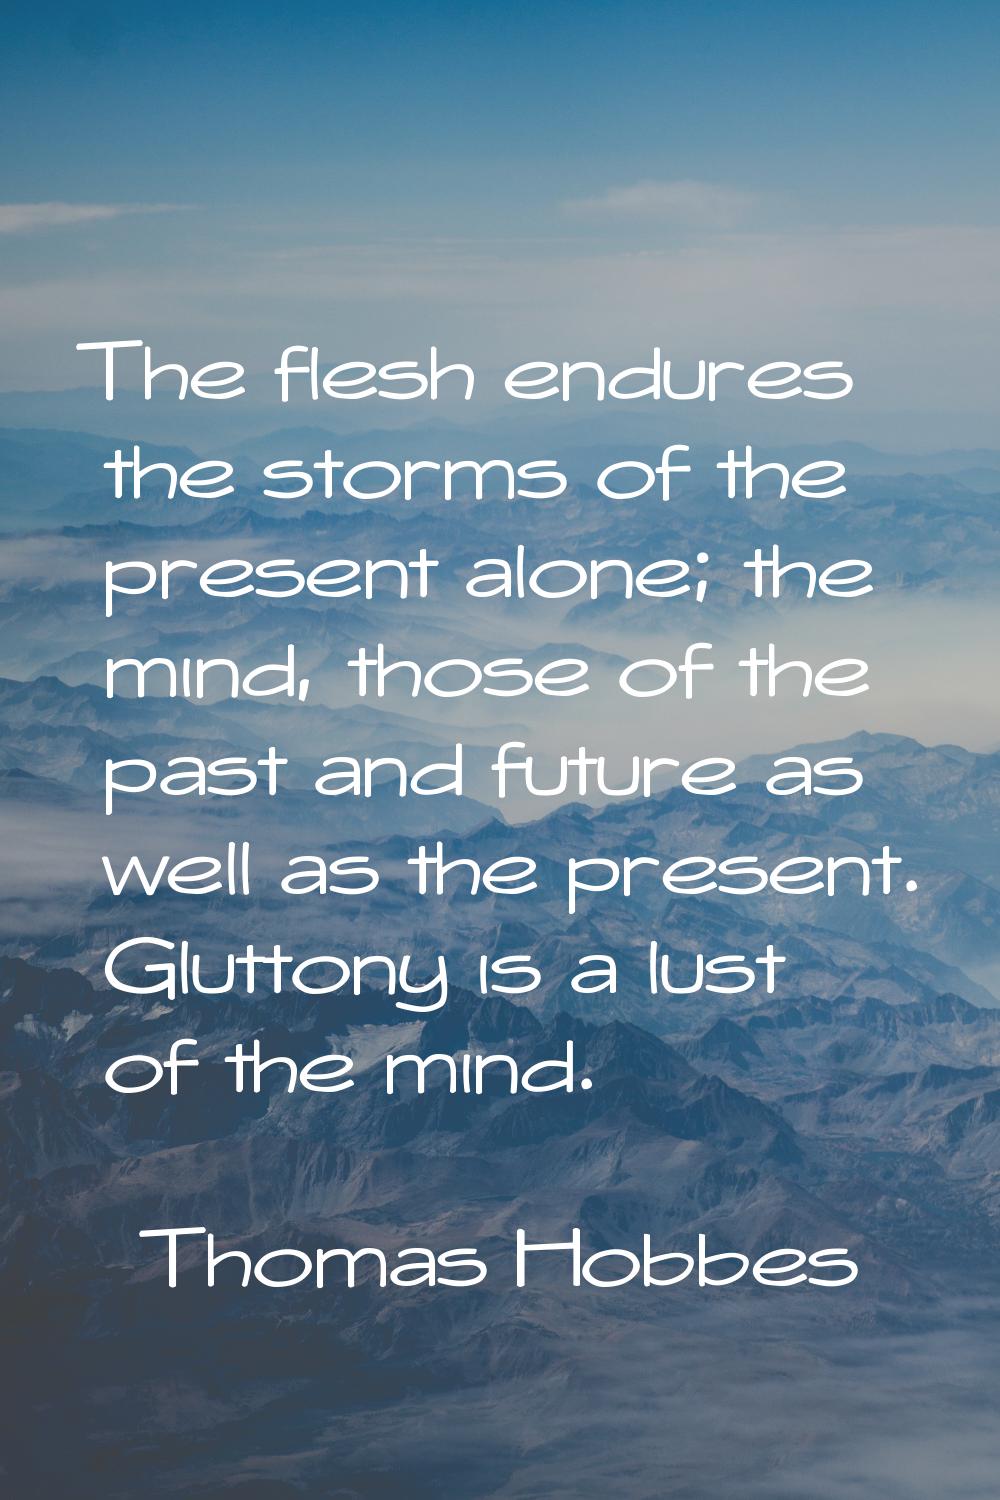 The flesh endures the storms of the present alone; the mind, those of the past and future as well a